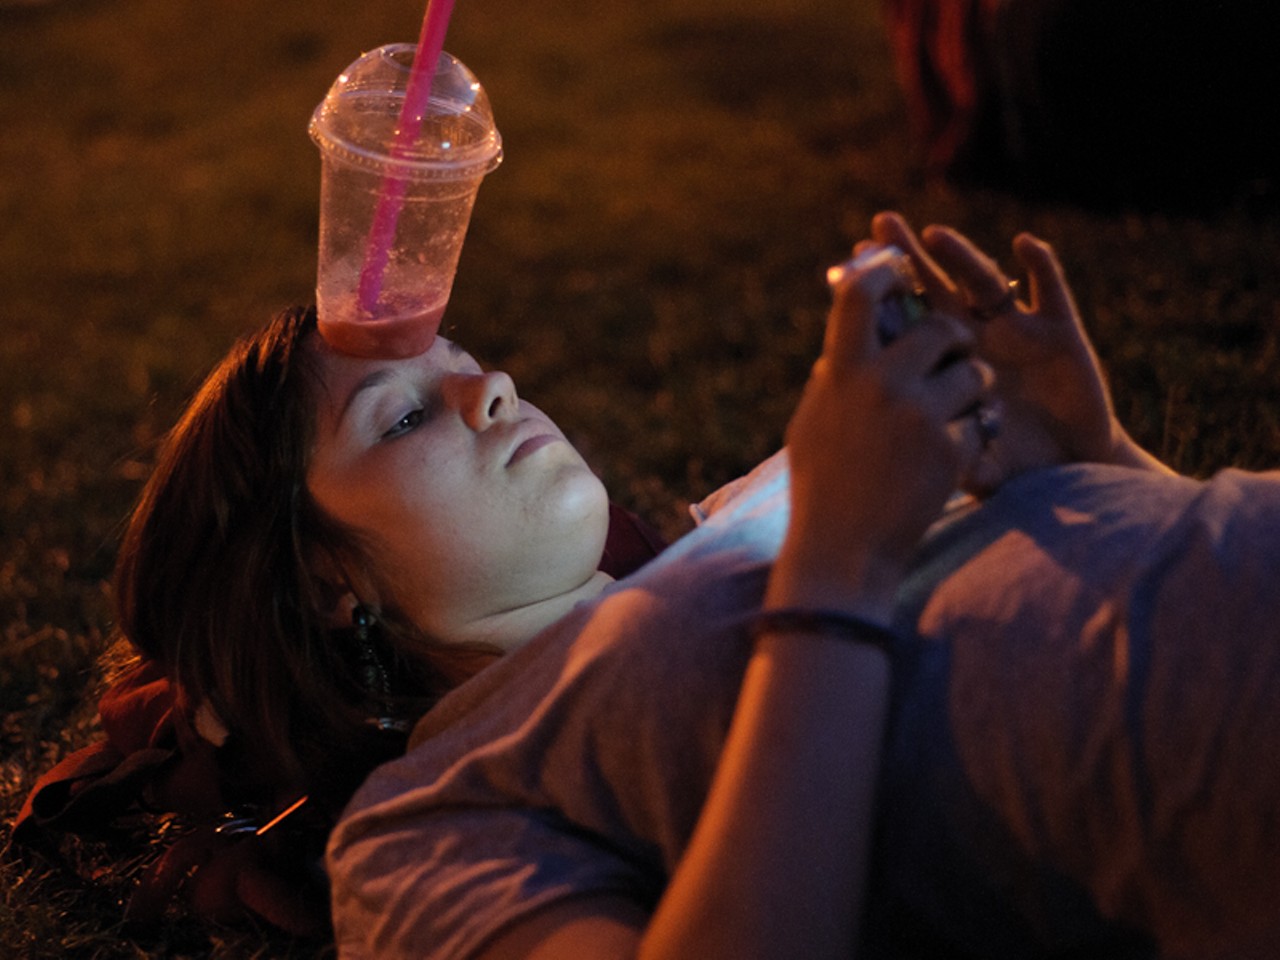 Hey, a girl's gotta put her smoothie somewhere while texting.